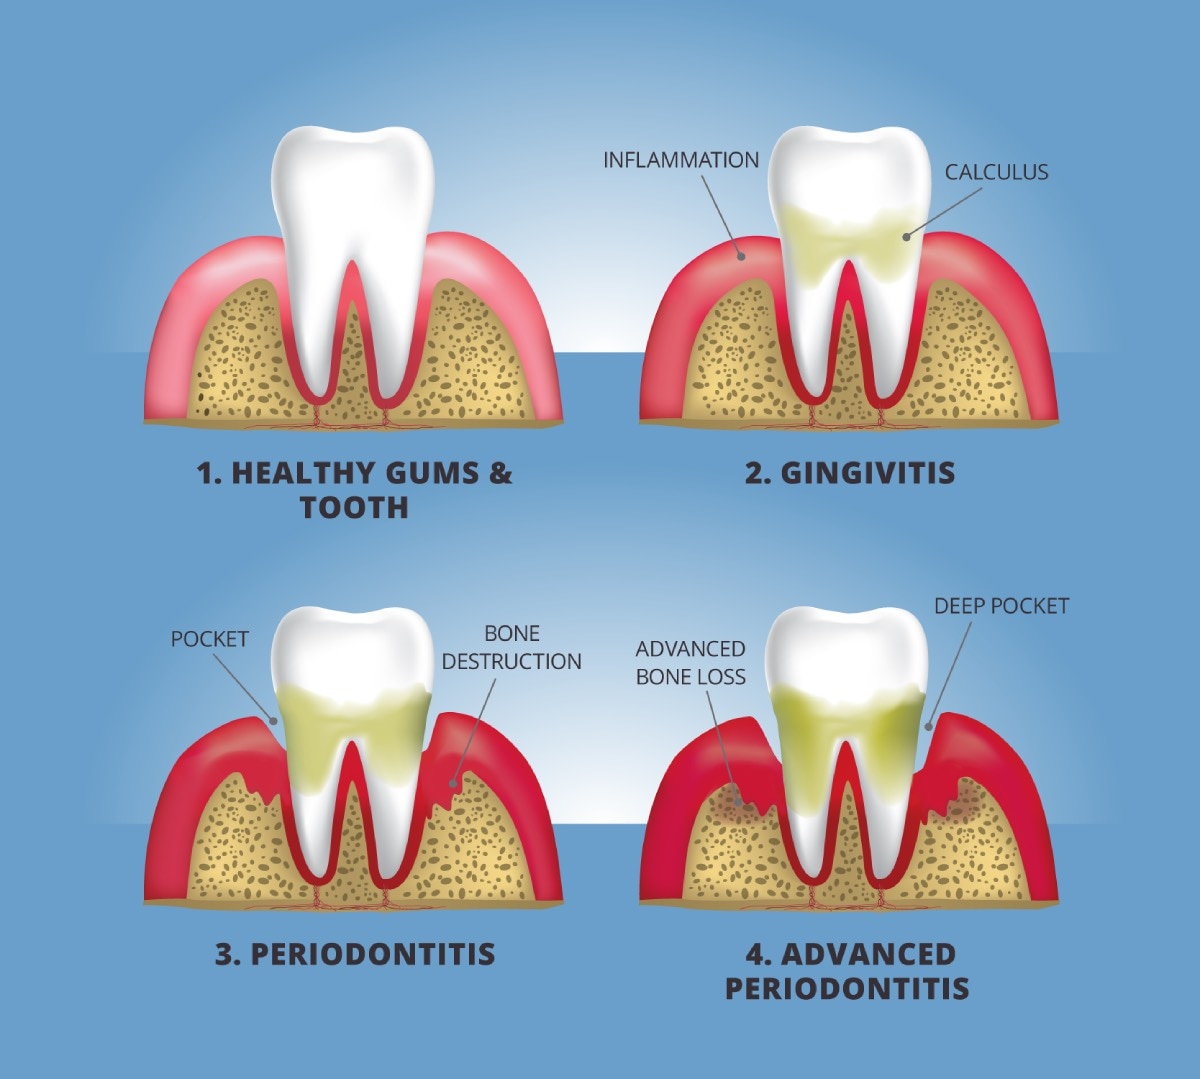 Close-up illustration of tooth and gums, showing four stages of gum disease: (1) healthy gums and tooth, (2) gingivitis, (3) periodontitis, and (4) advanced periodontitis. Labels point out inflammation, calculus, pocket, bone destruction, advanced bone loss, and deep pocket.